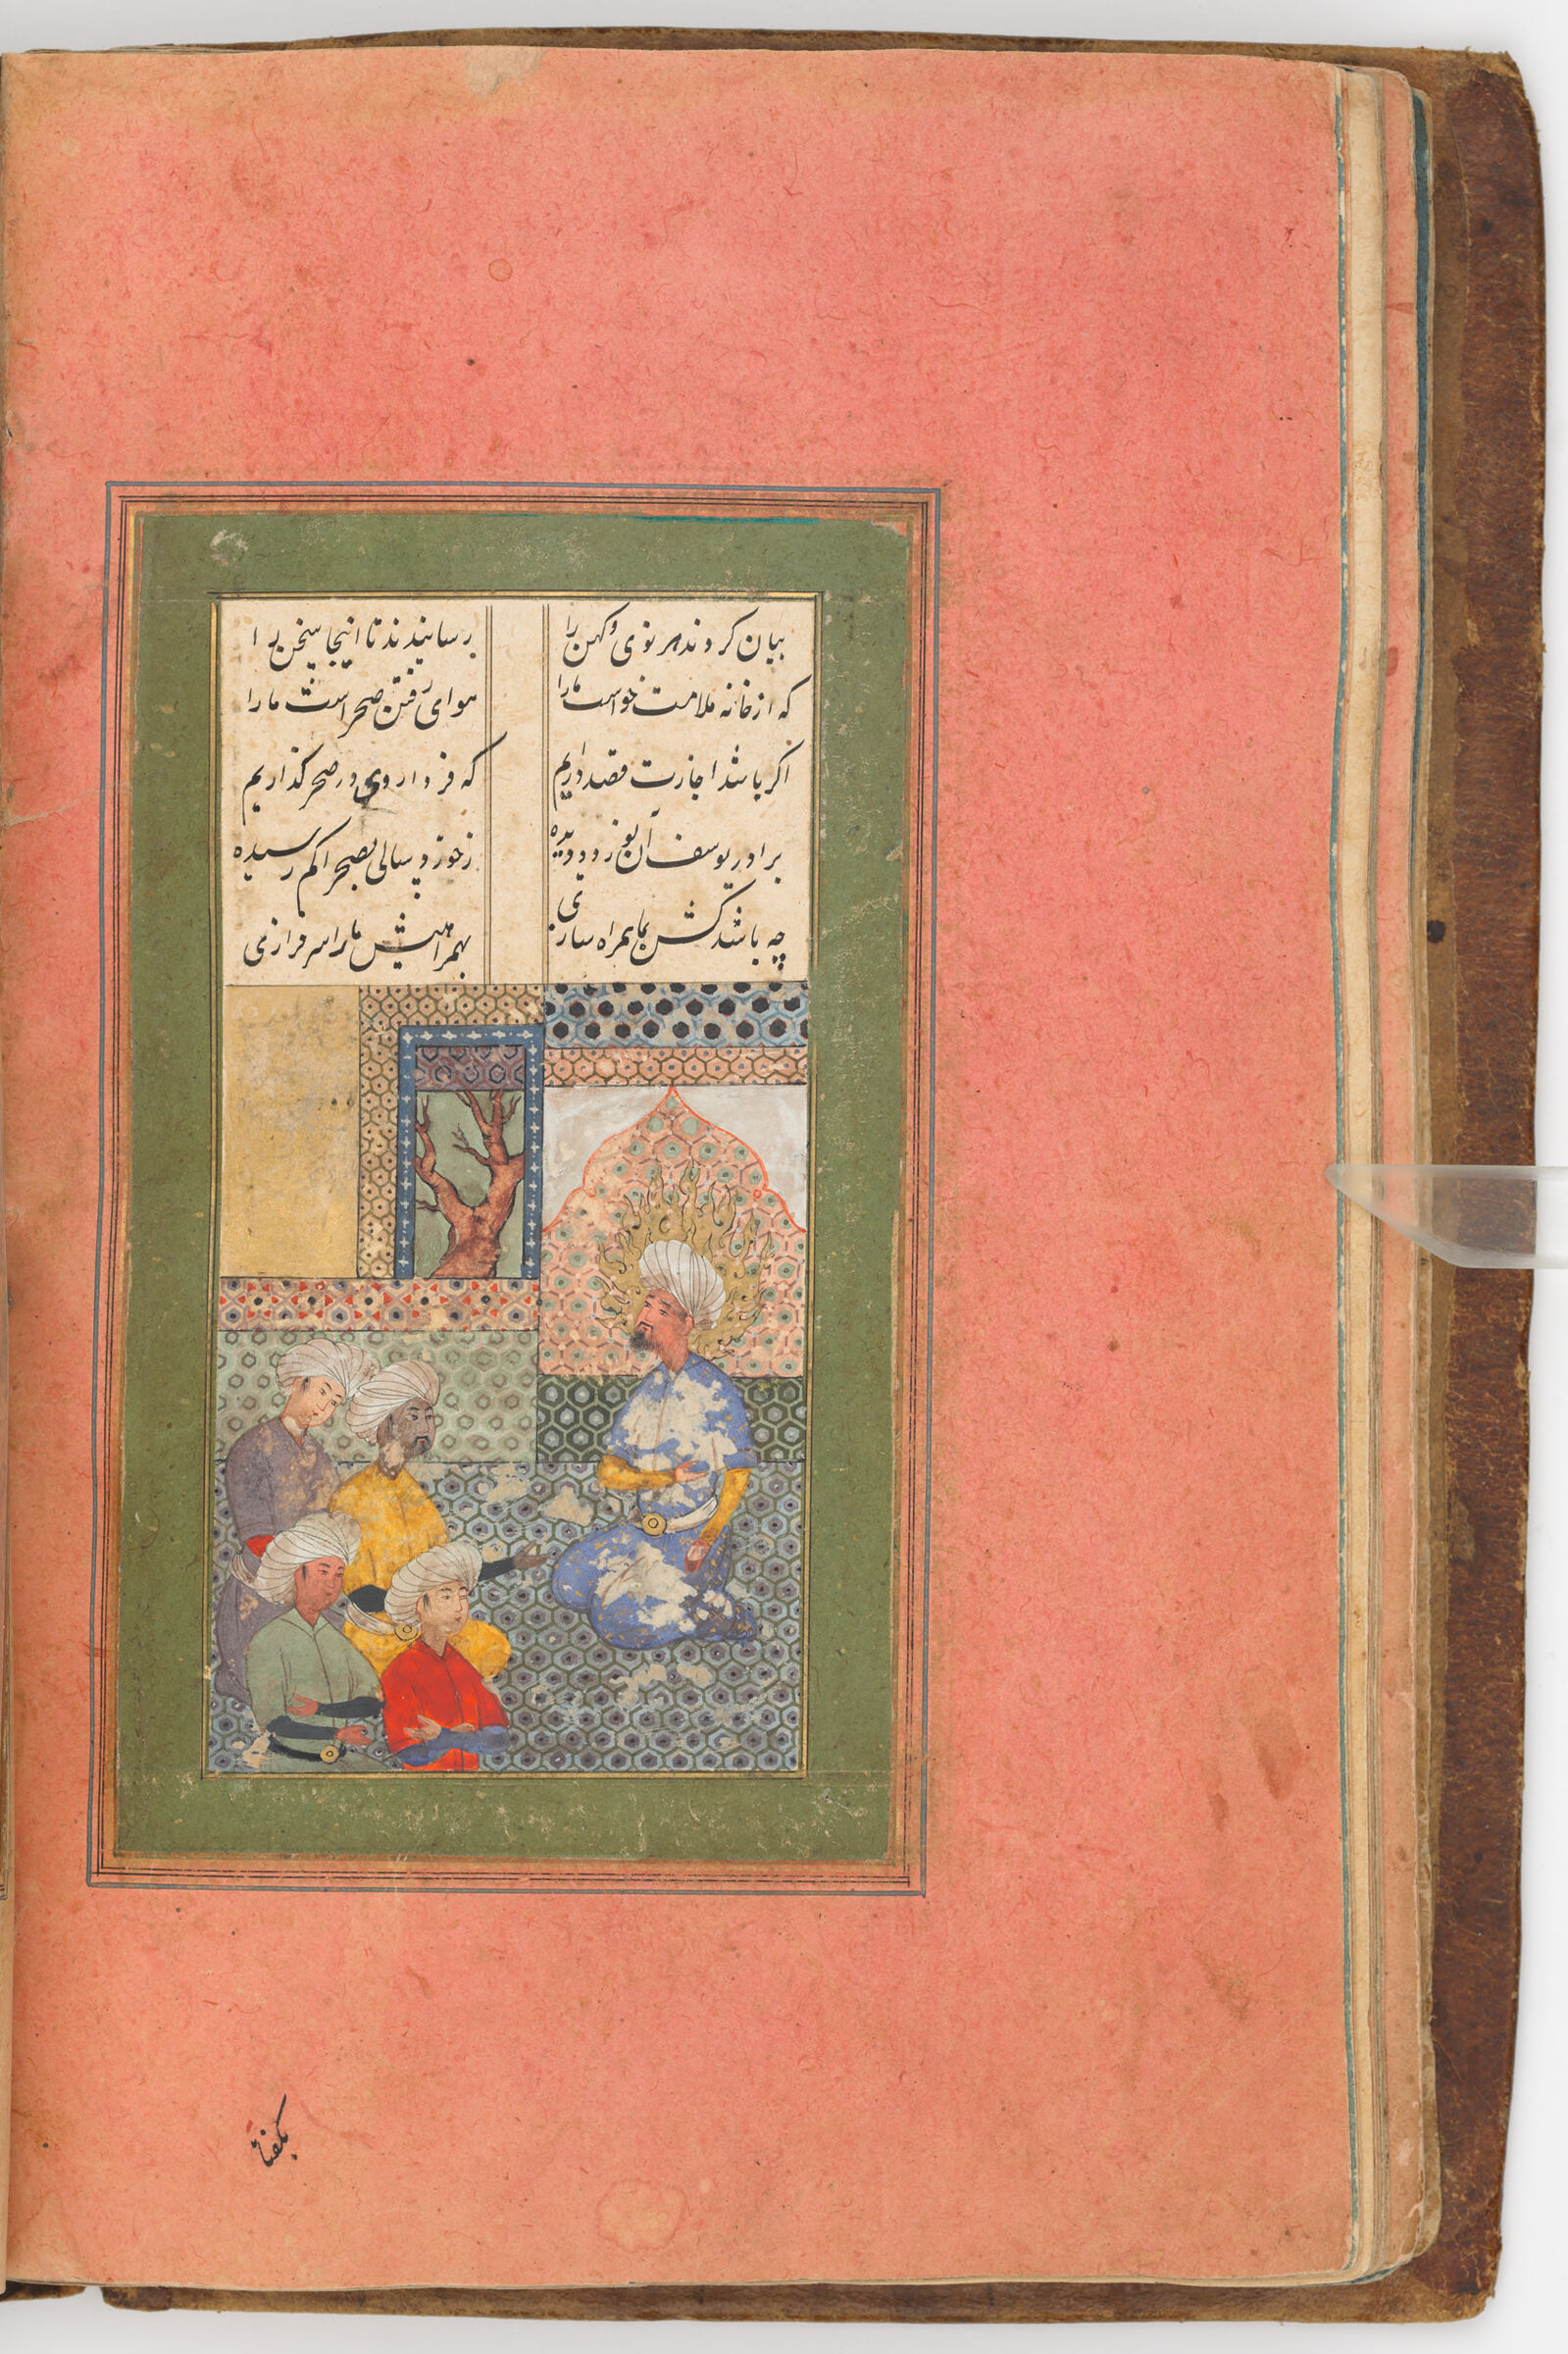 Yusuf’s Brothers Plead To Take Their Youngest Brother Home (Text Recto; Painting Verso Of Folio 50); Illustrated Folio From A Manuscript Of Yusuf And Zulaykha By Nizami